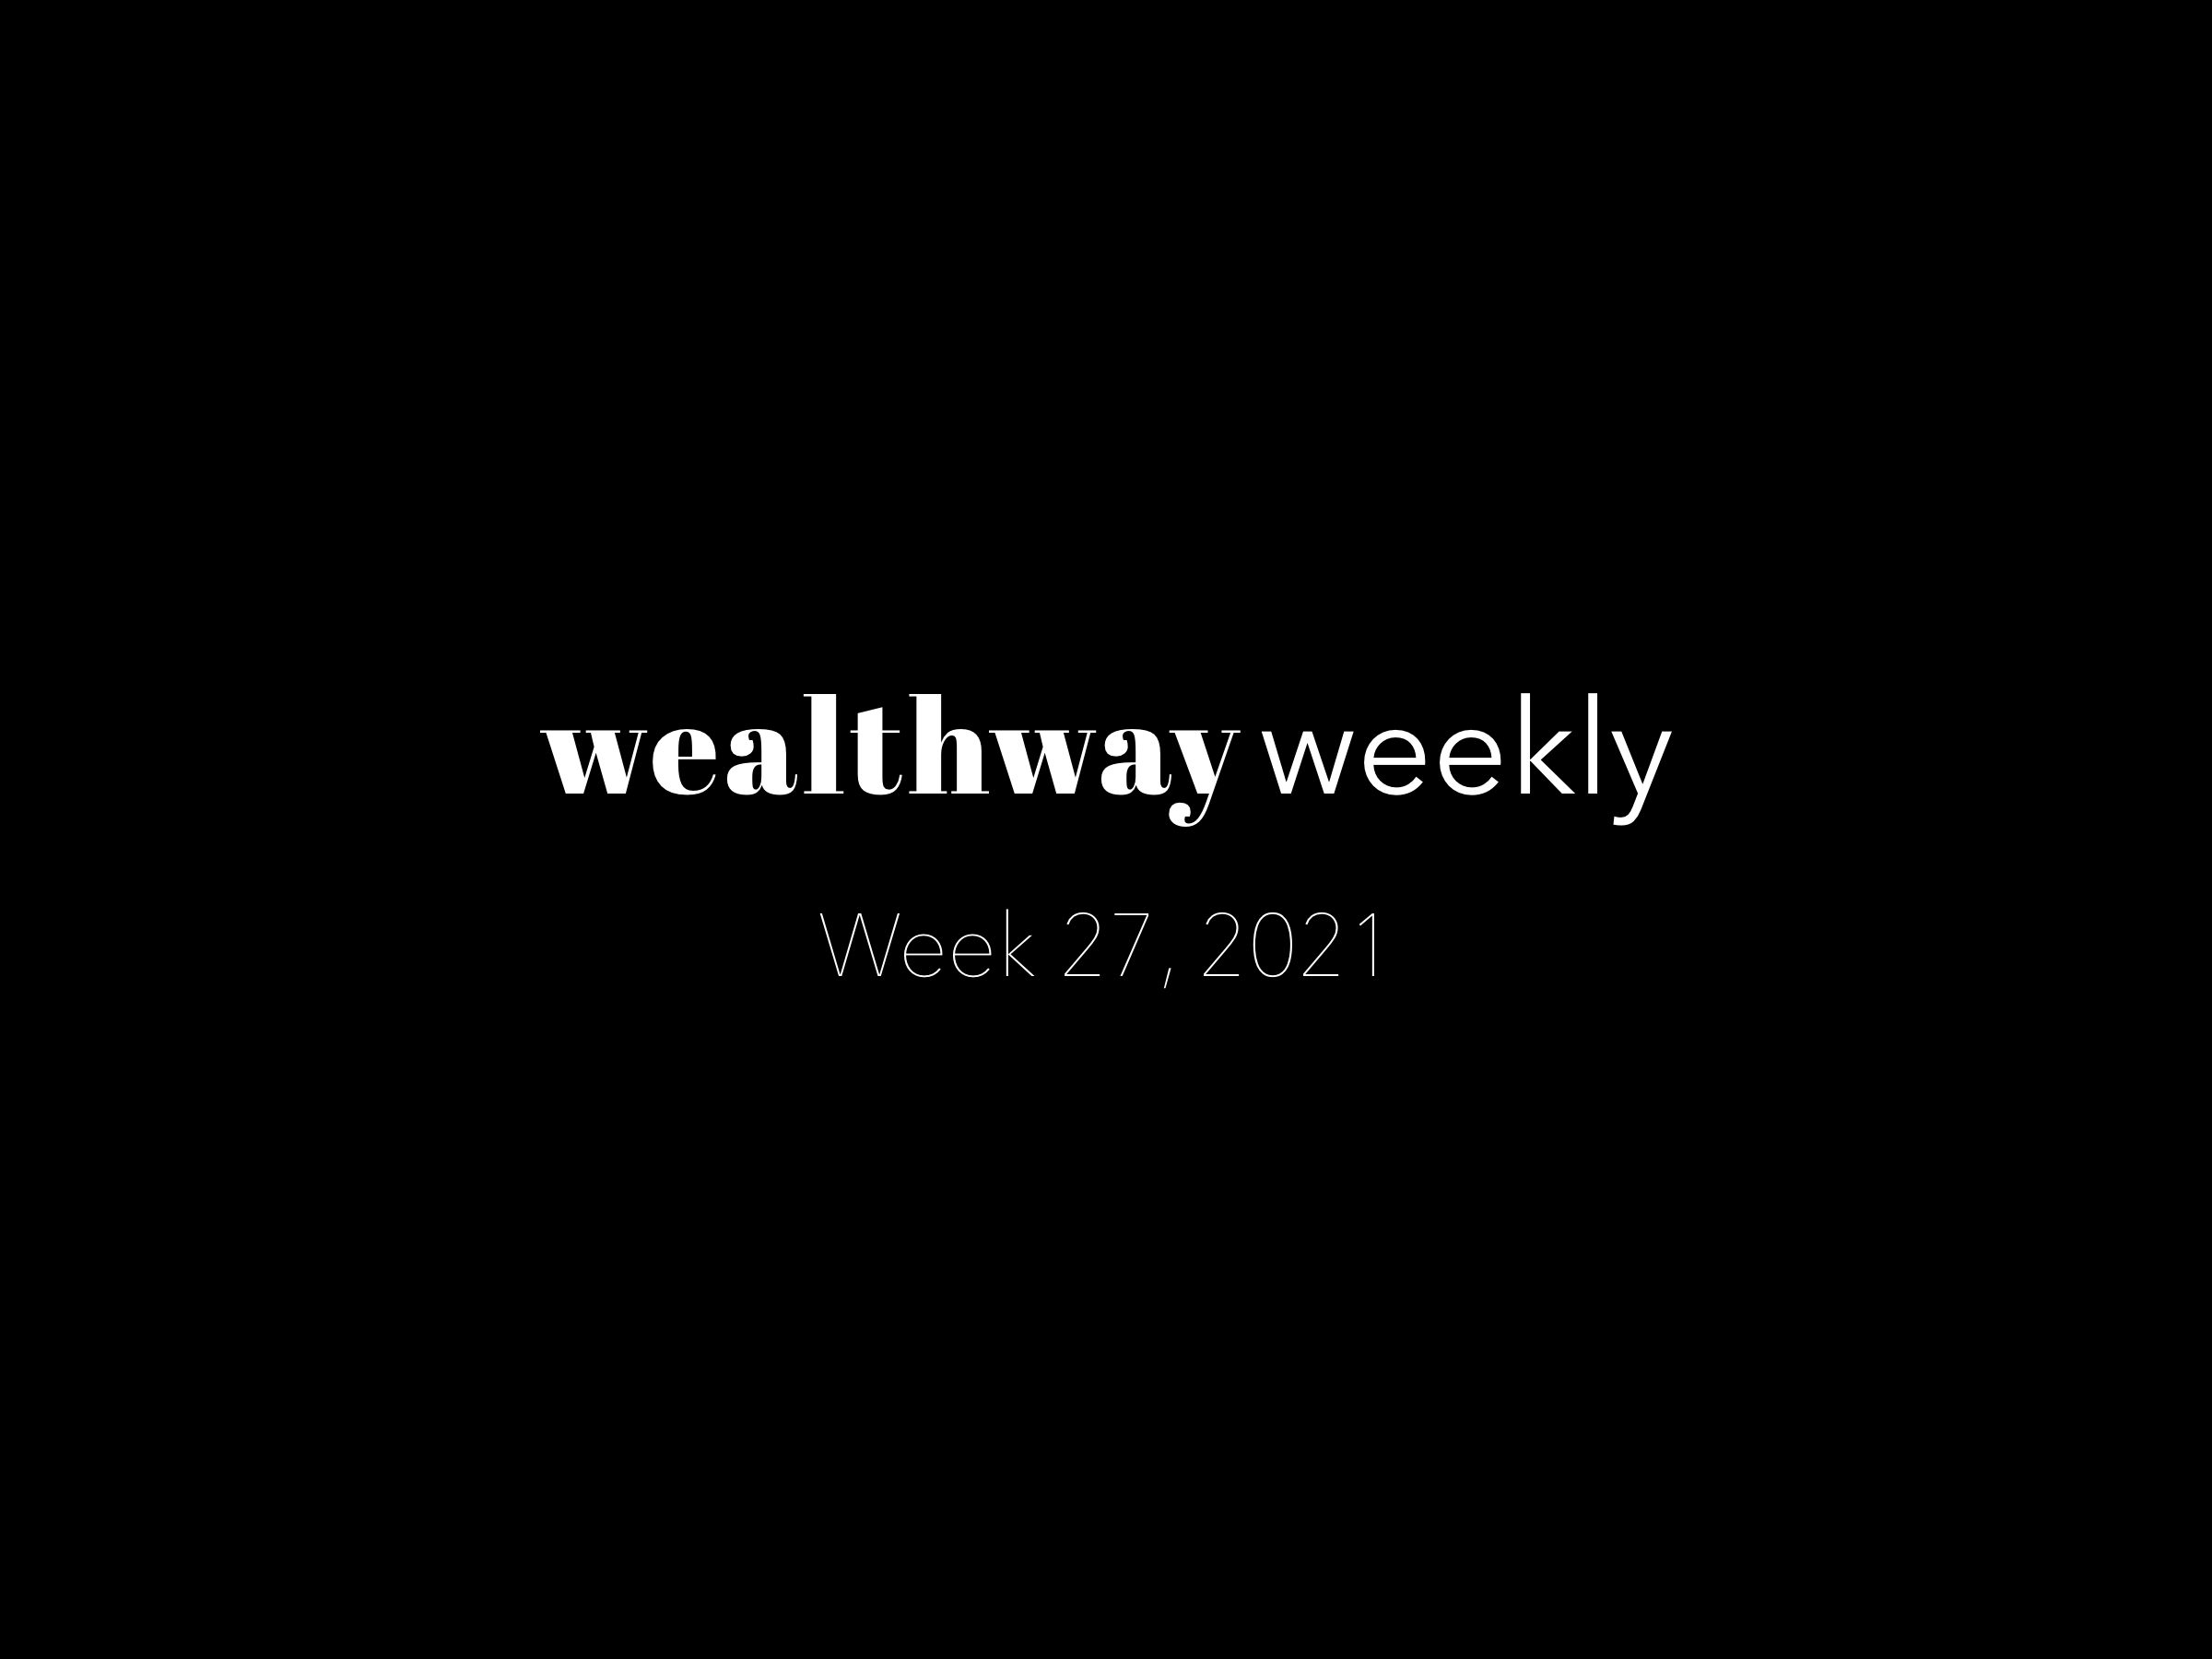 Wealthway Weekly (W27 2021)